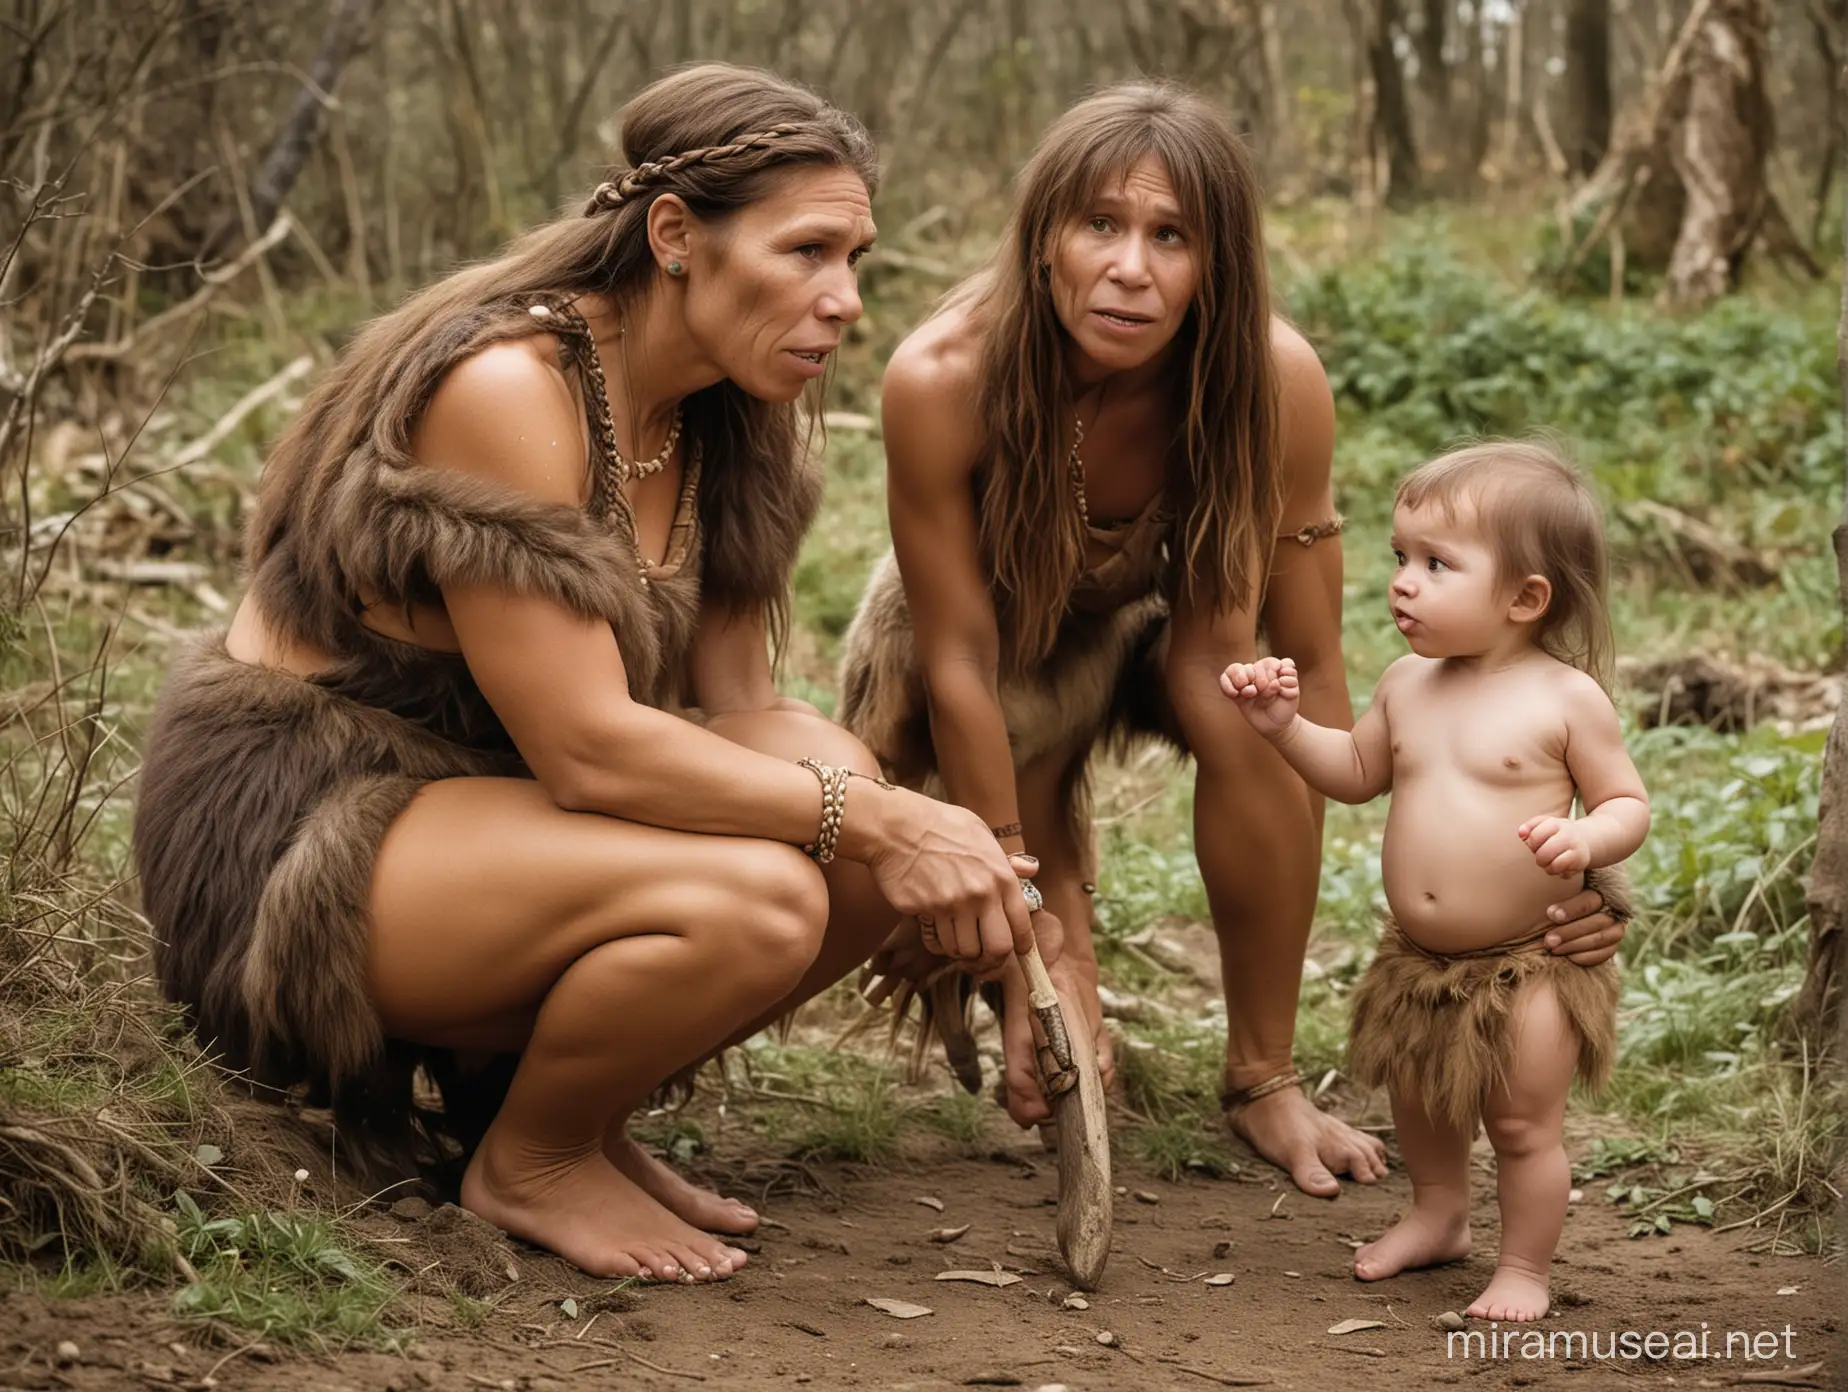 Neanderthal Woman and Child in Prehistoric Settlement